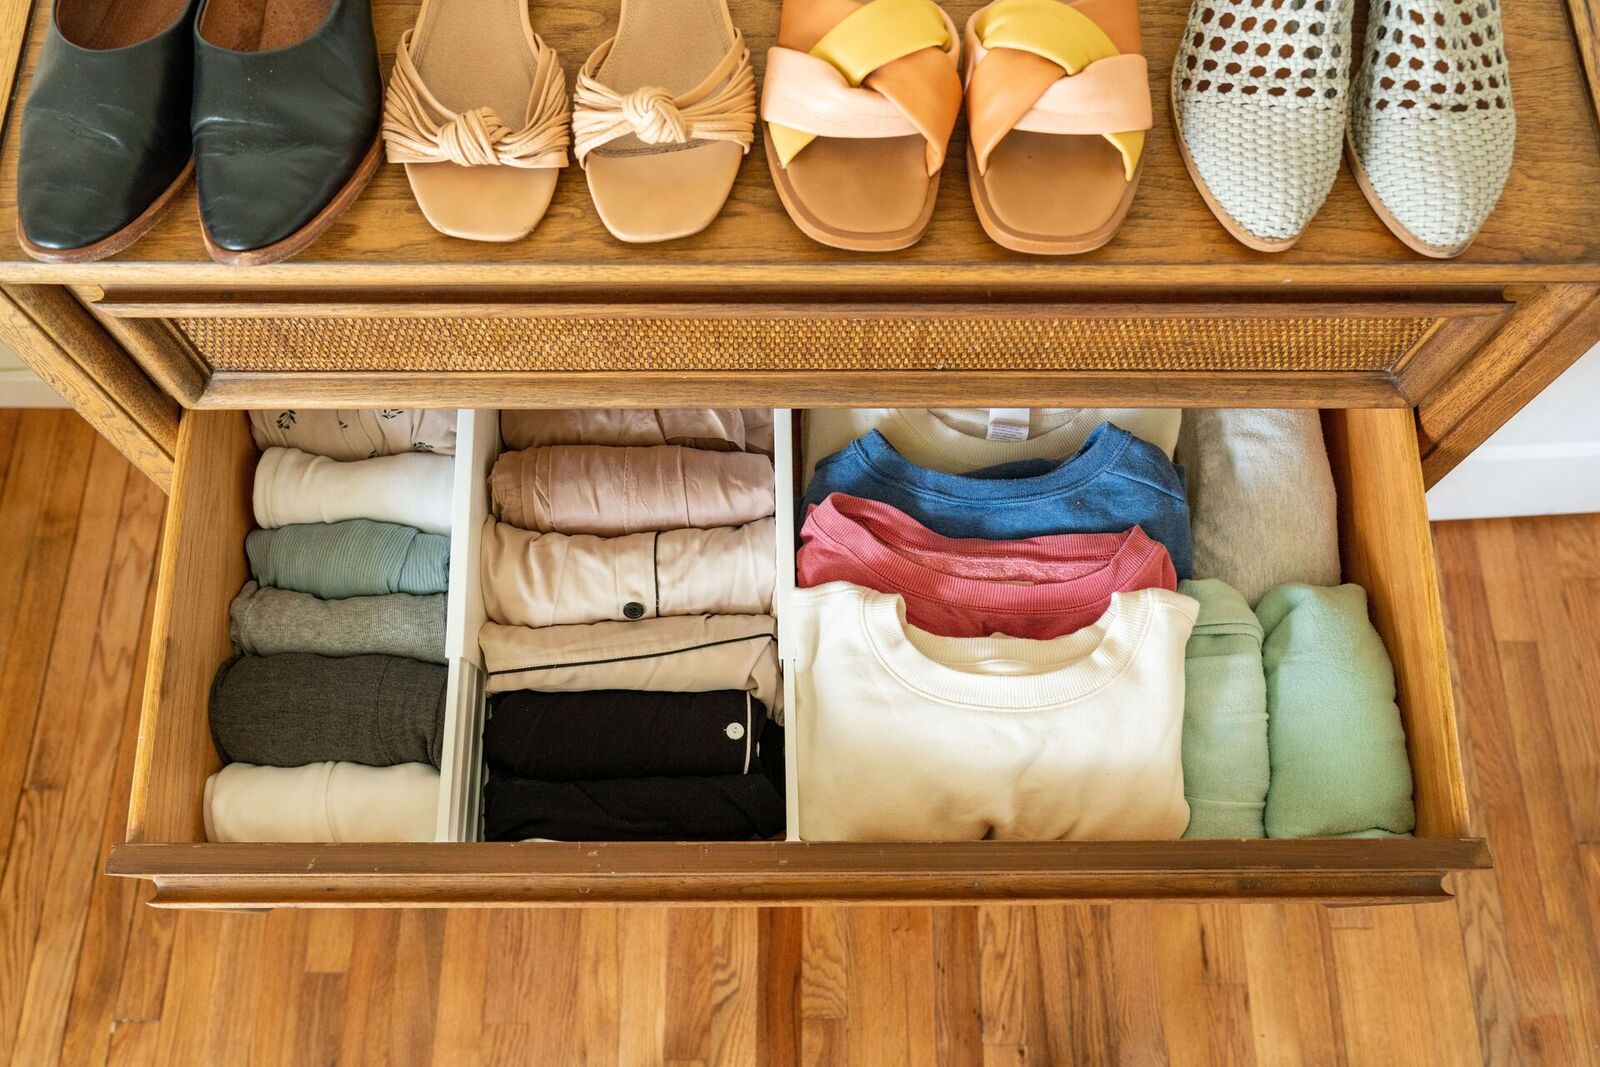 Organizing A Dresser: 10 Ways To Sort Drawers In Style